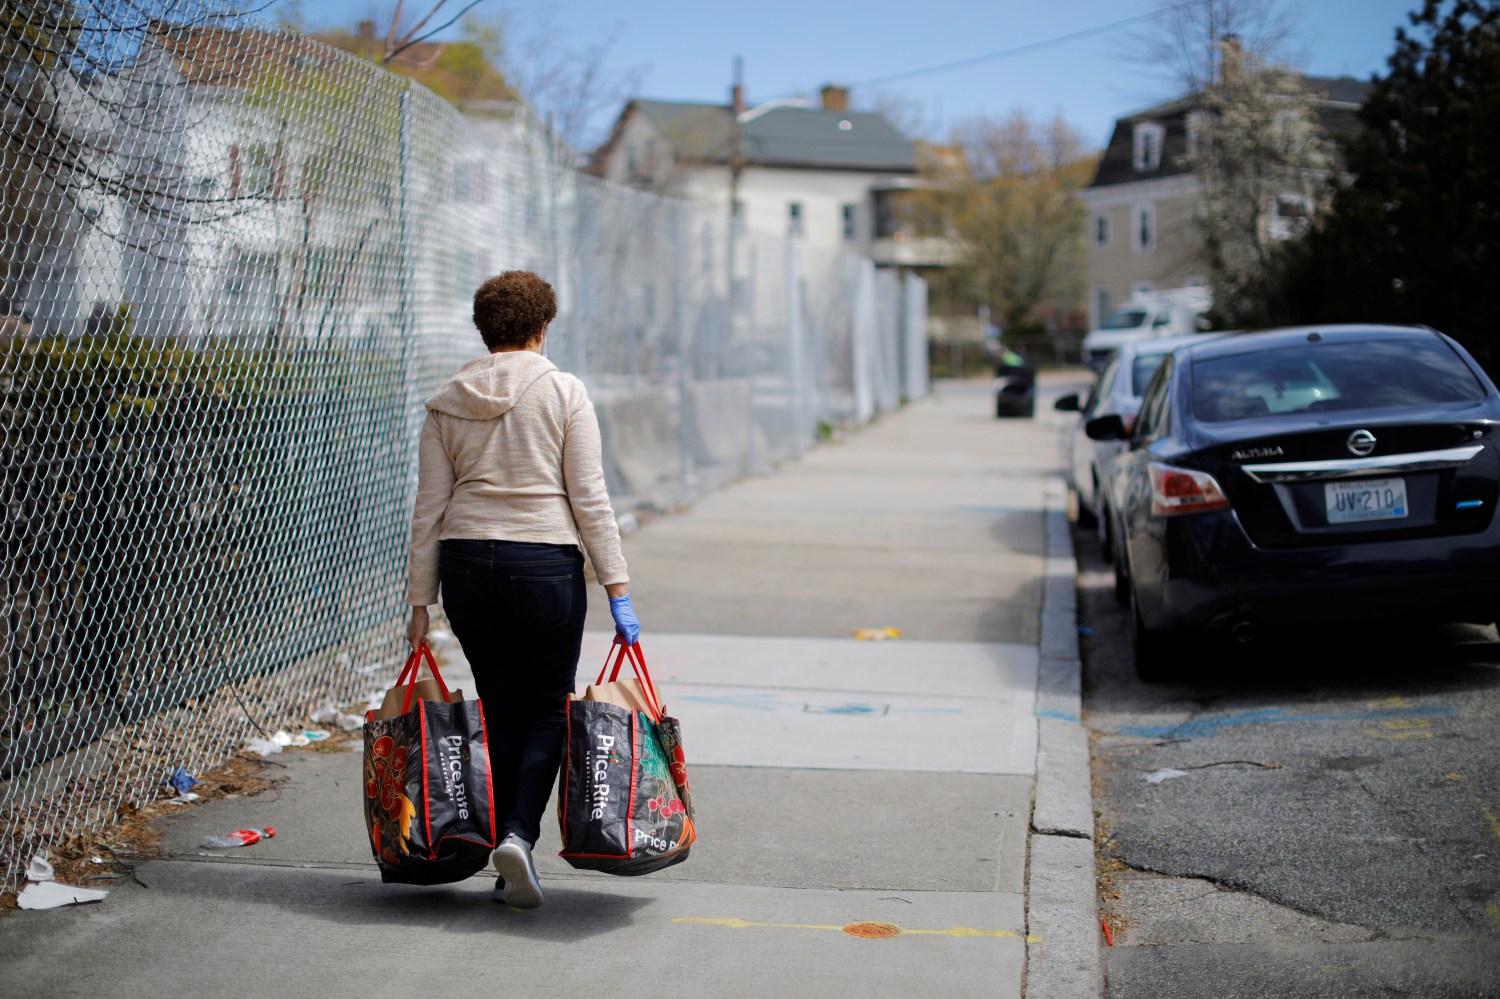 A woman carries her free groceries from the PICA Olneyville Food Center amid the coronavirus disease (COVID-19) outbreak in Providence, Rhode Island, U.S., April 23, 2020.   REUTERS/Brian Snyder